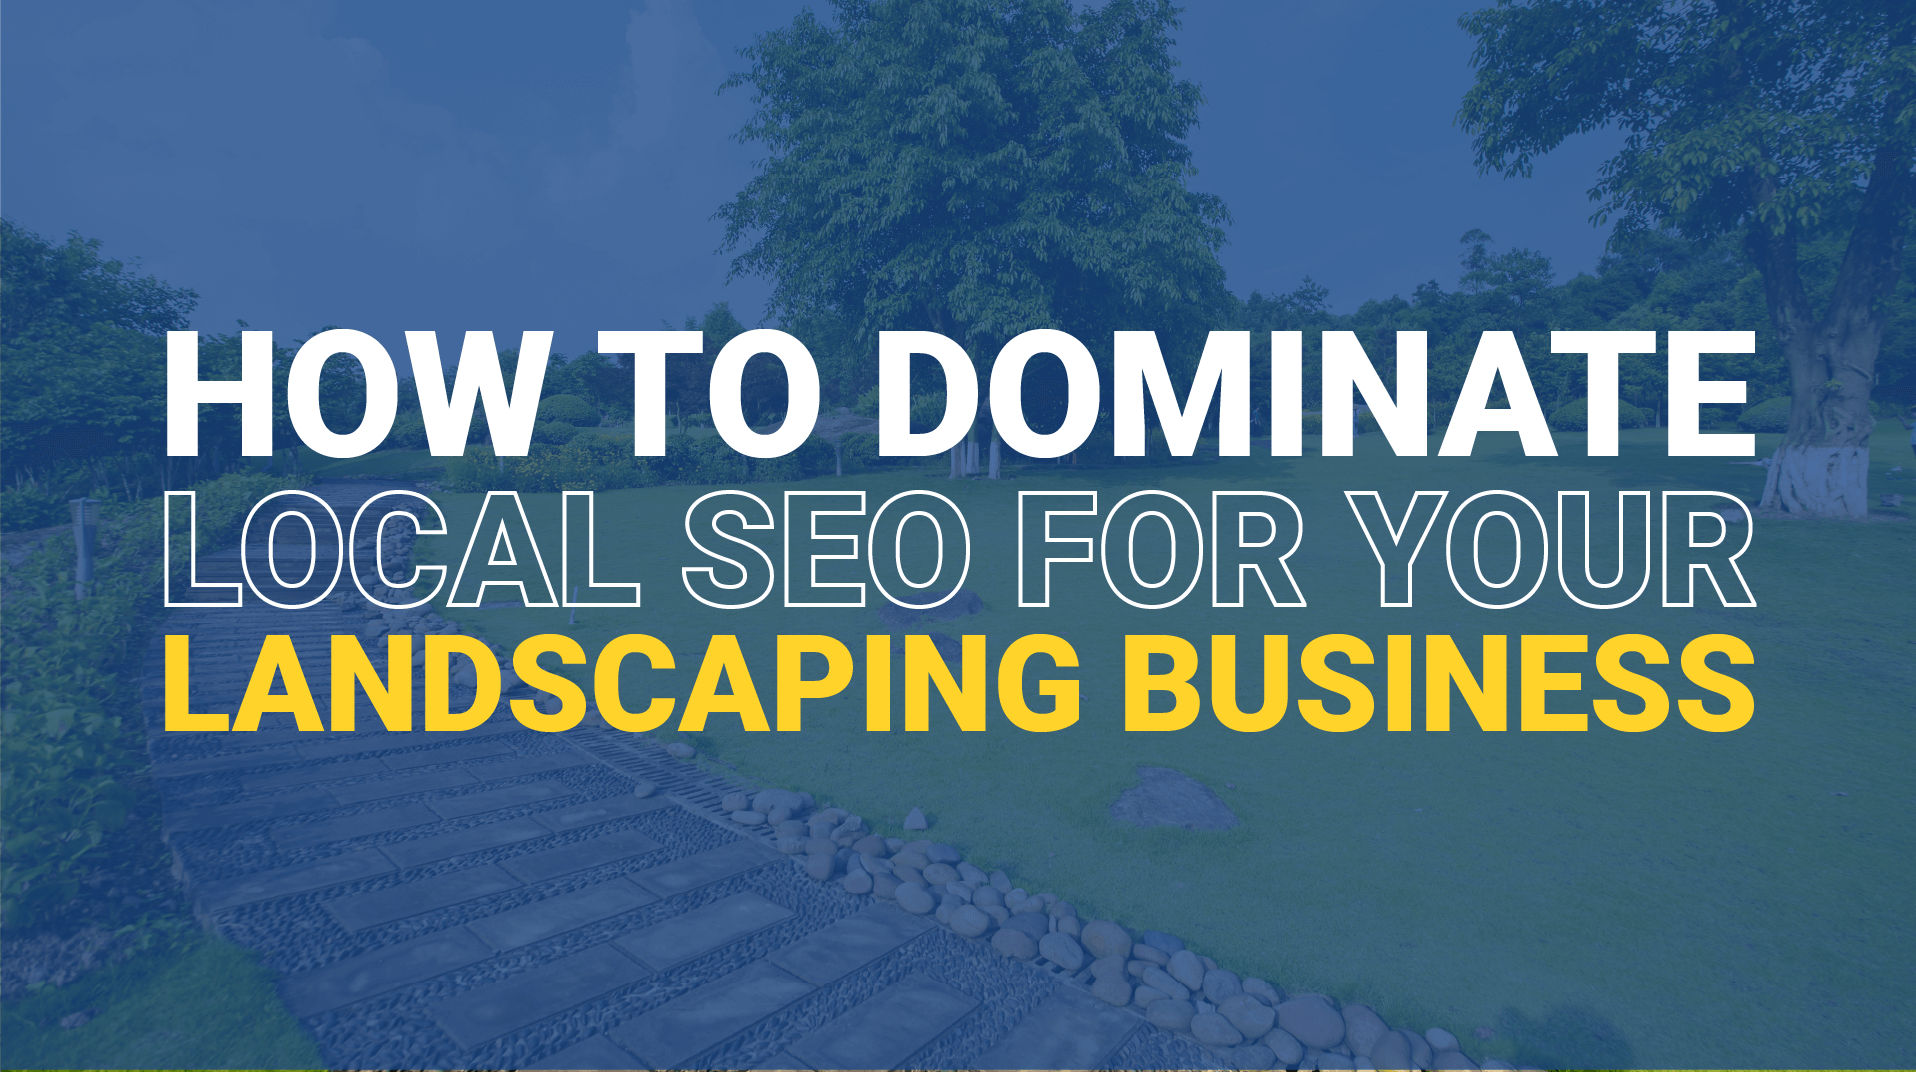 A Comprehensive Guide for Landscaping Businesses to Dominate Local SEO